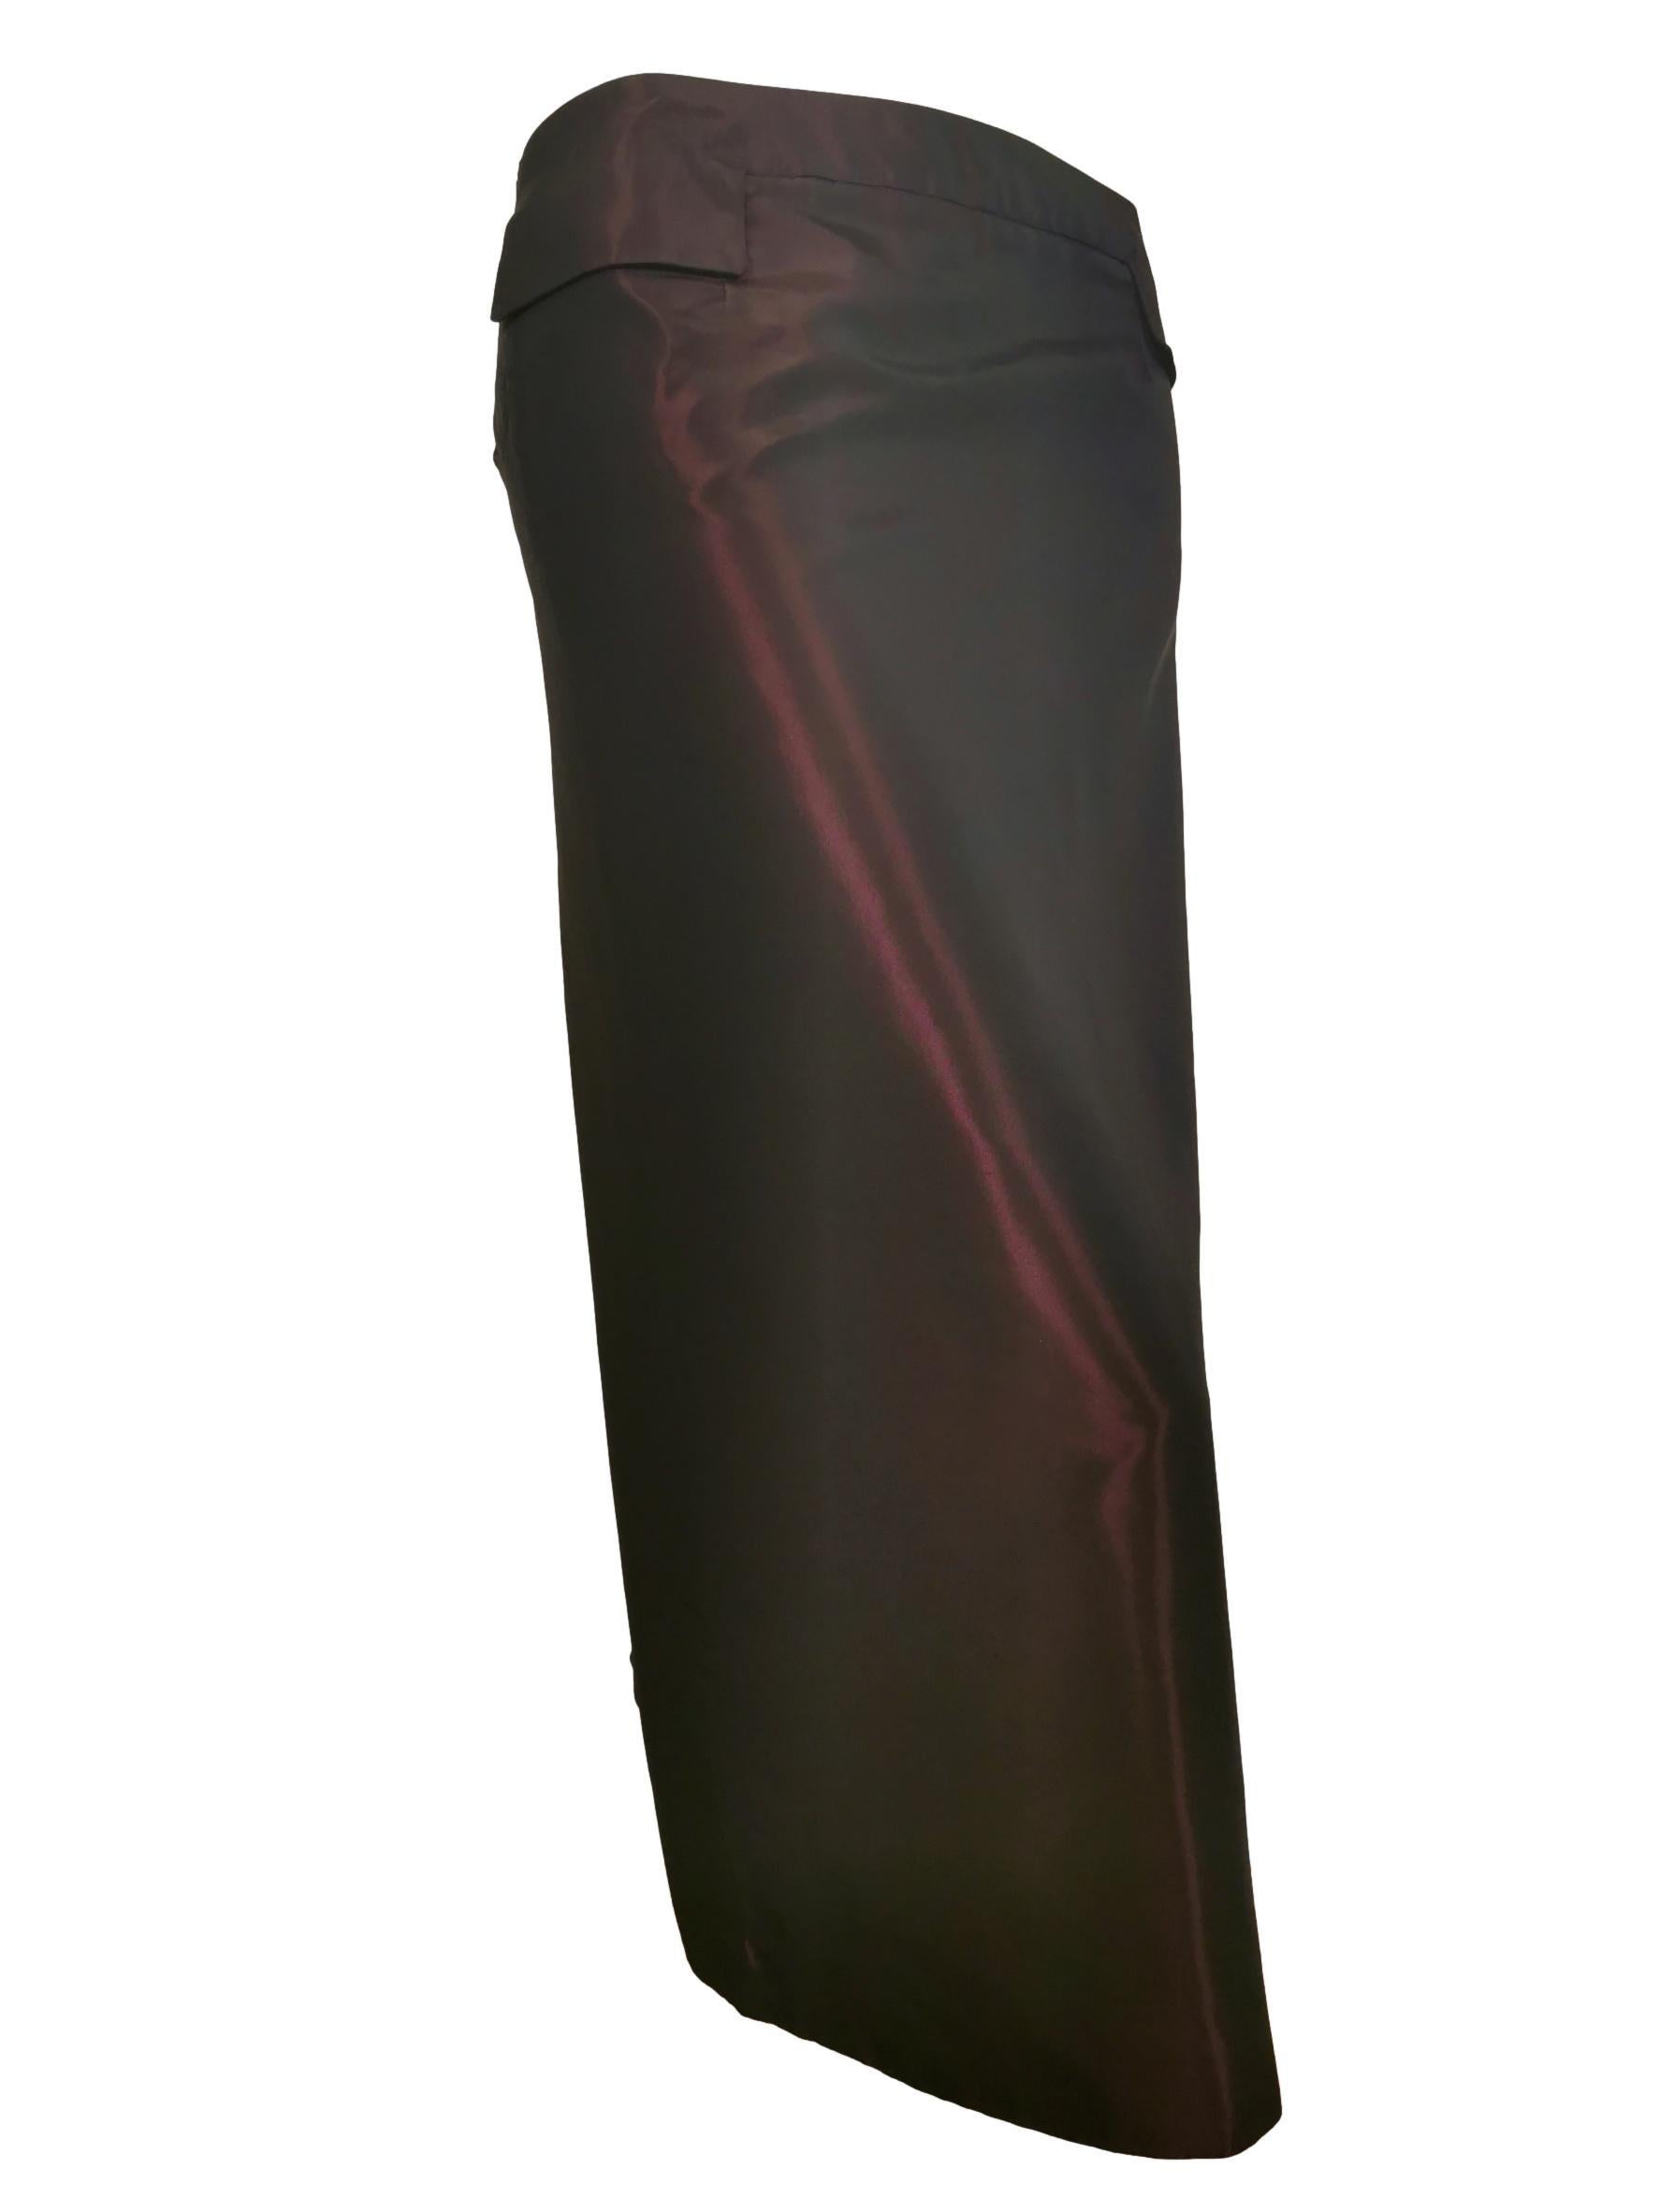 Alexander McQueen Two Tone Kick Pleat Fitted Skirt 1996 For Sale 7